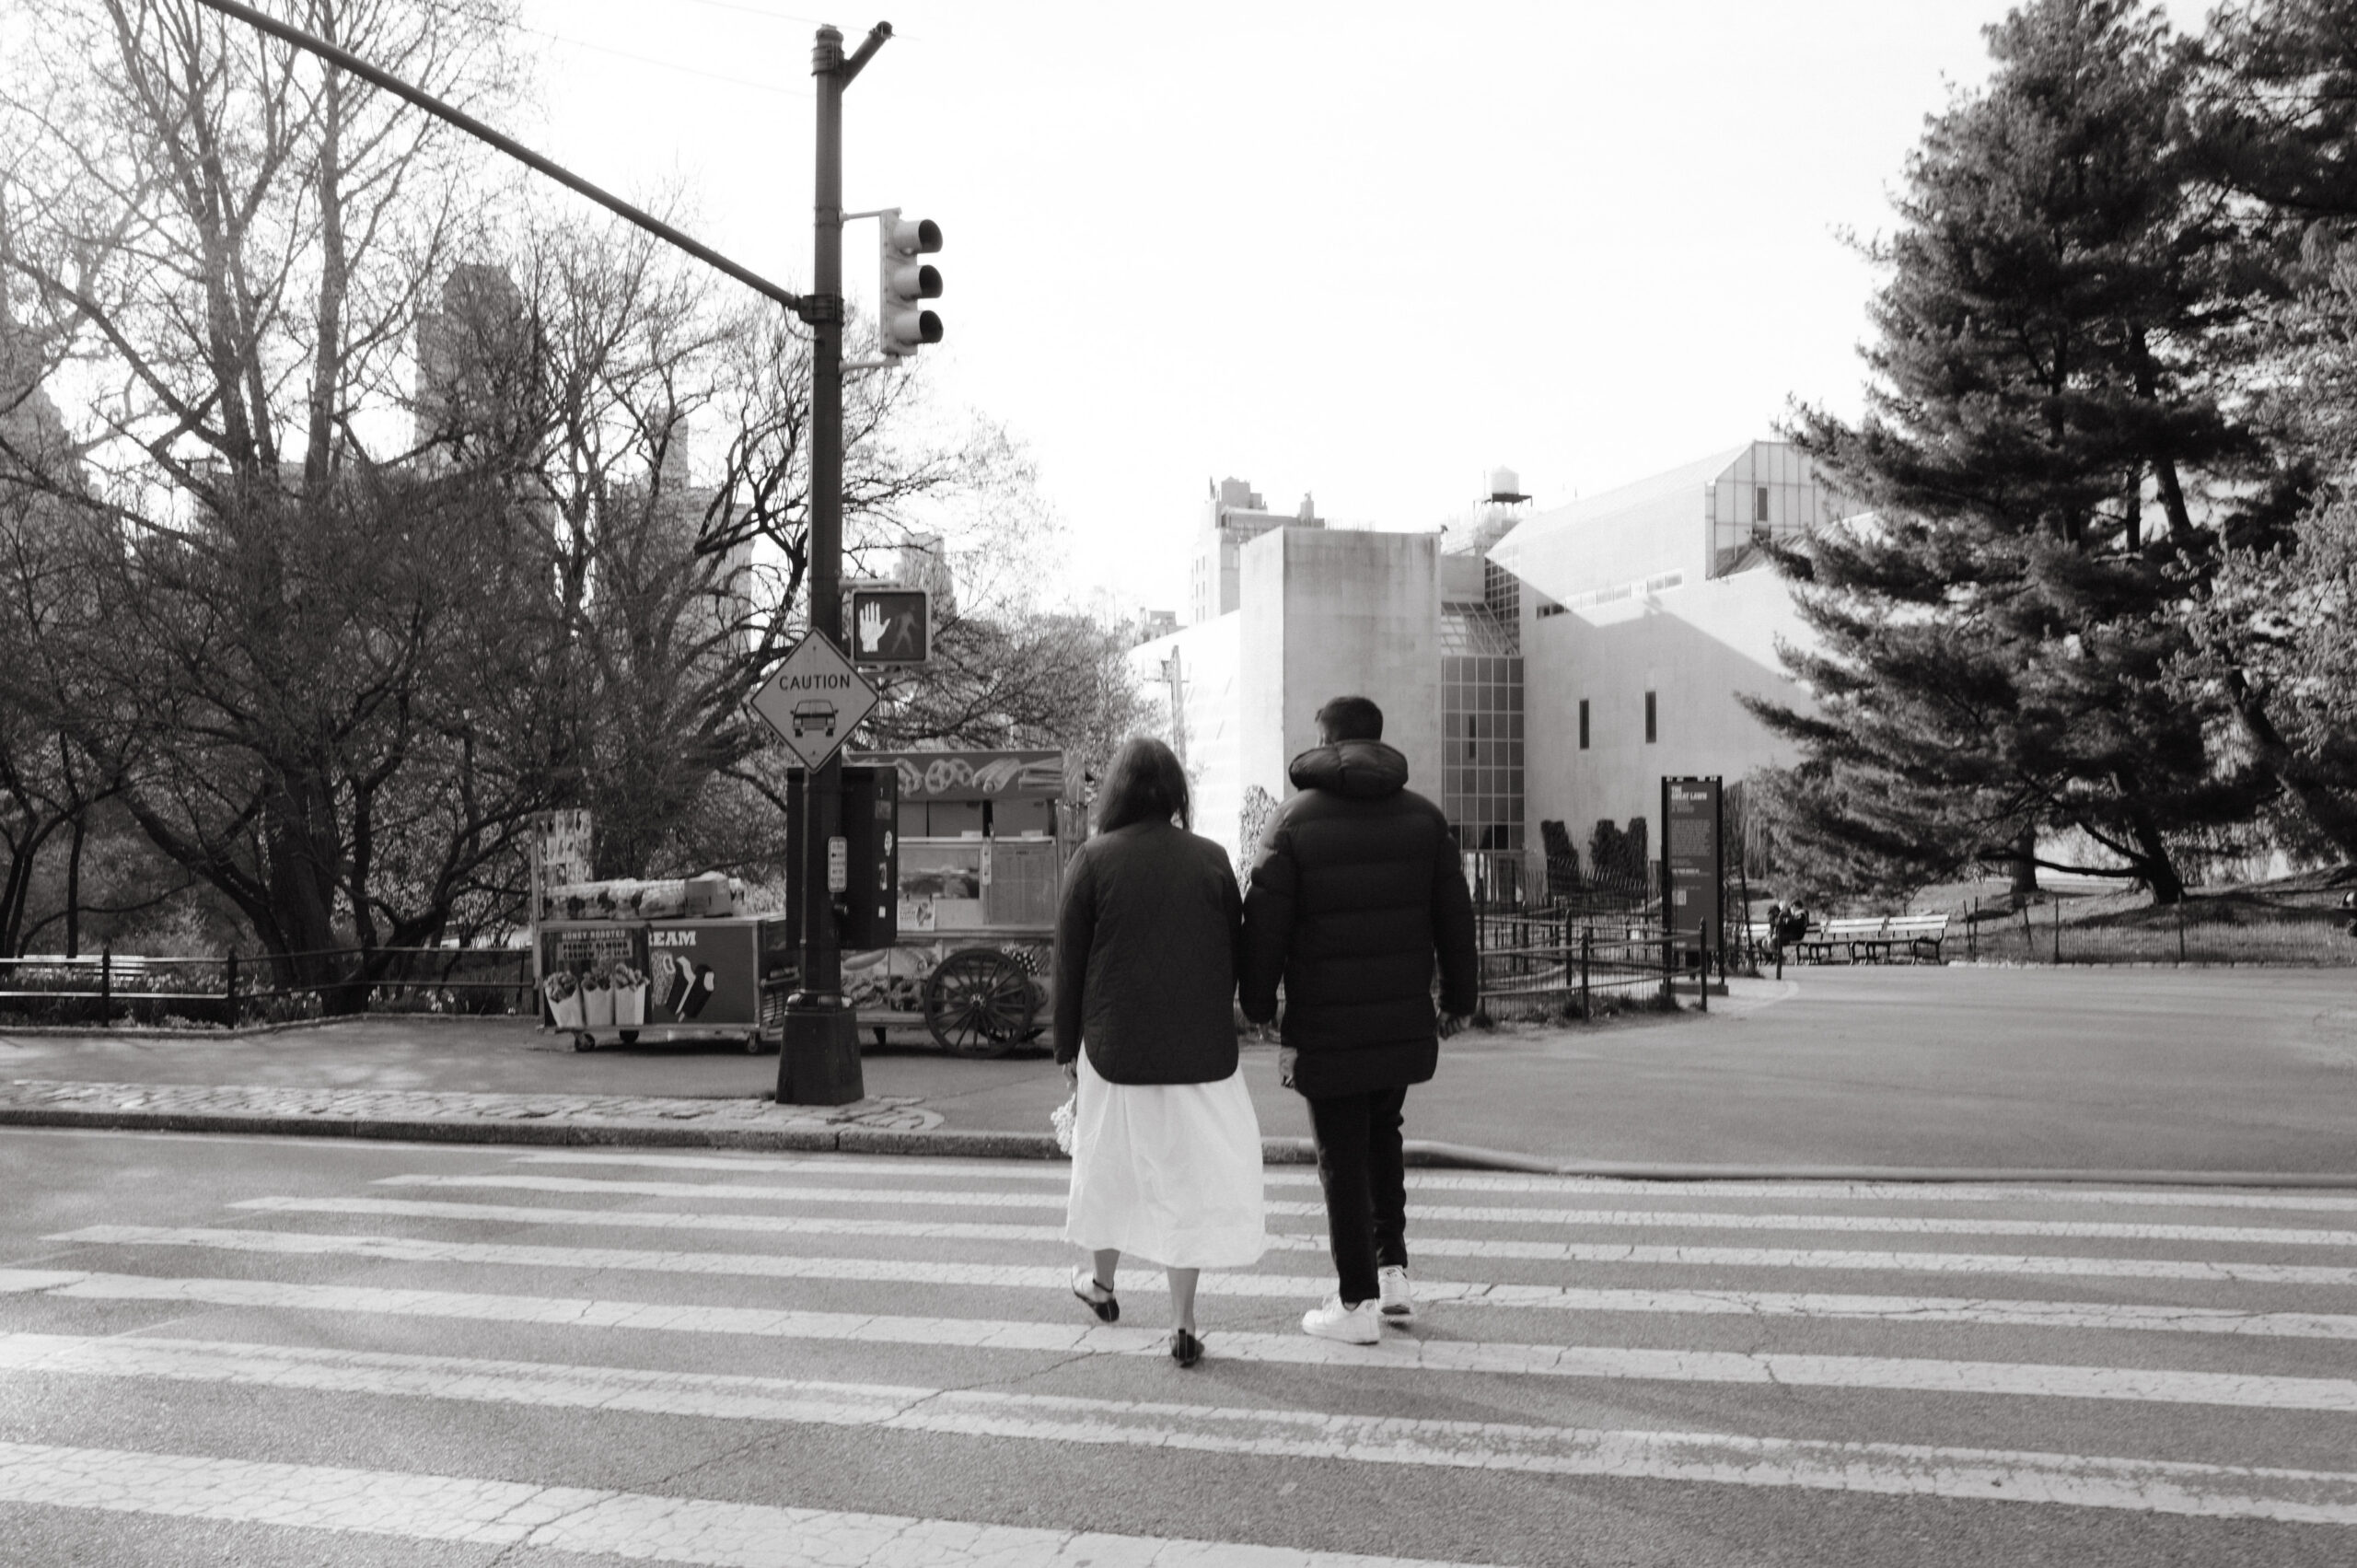 The engaged couple is crossing a pedestrian lane in NYC. Image by Jenny Fu Studio